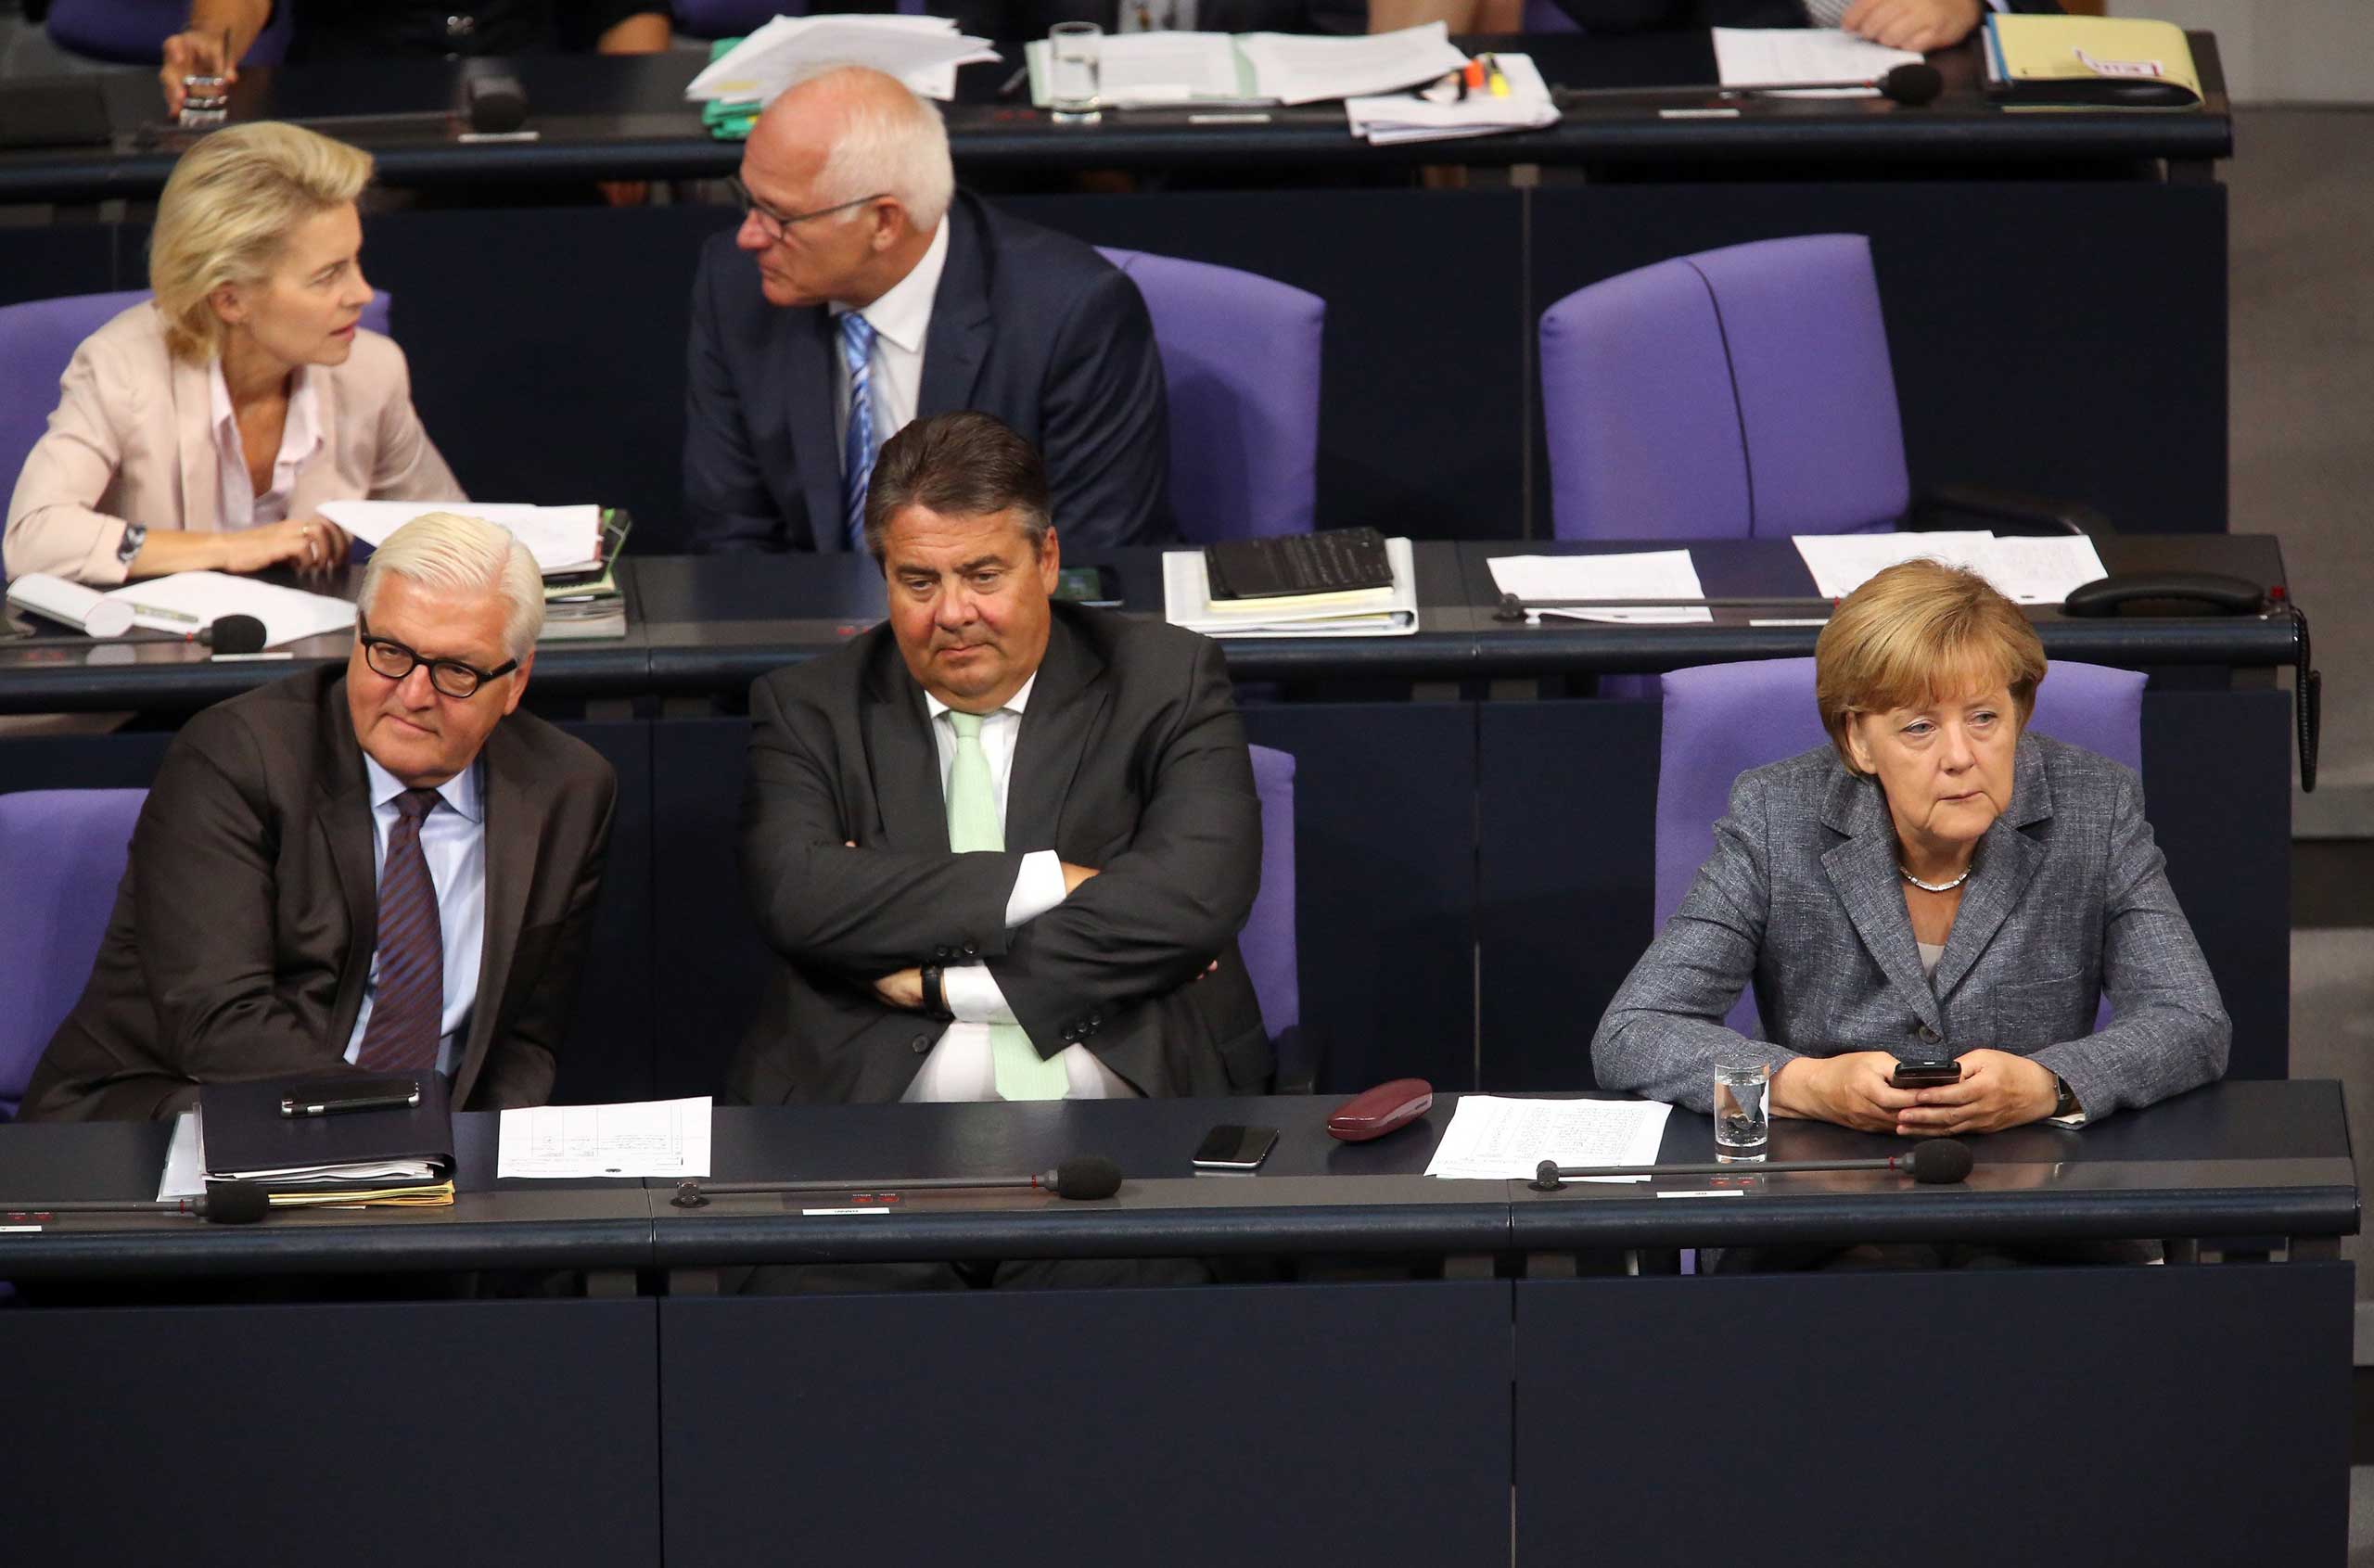 Foreign Minister Frank-Walter Steinmeier, Vice Chancellor and Economy and Energy Minister Sigmar Gabrie and German Chancellor Angela Merkel attend a meeting of the Bundestag, in Berlin, on Aug. 19, 2015. (Adam Berry—Getty Images)